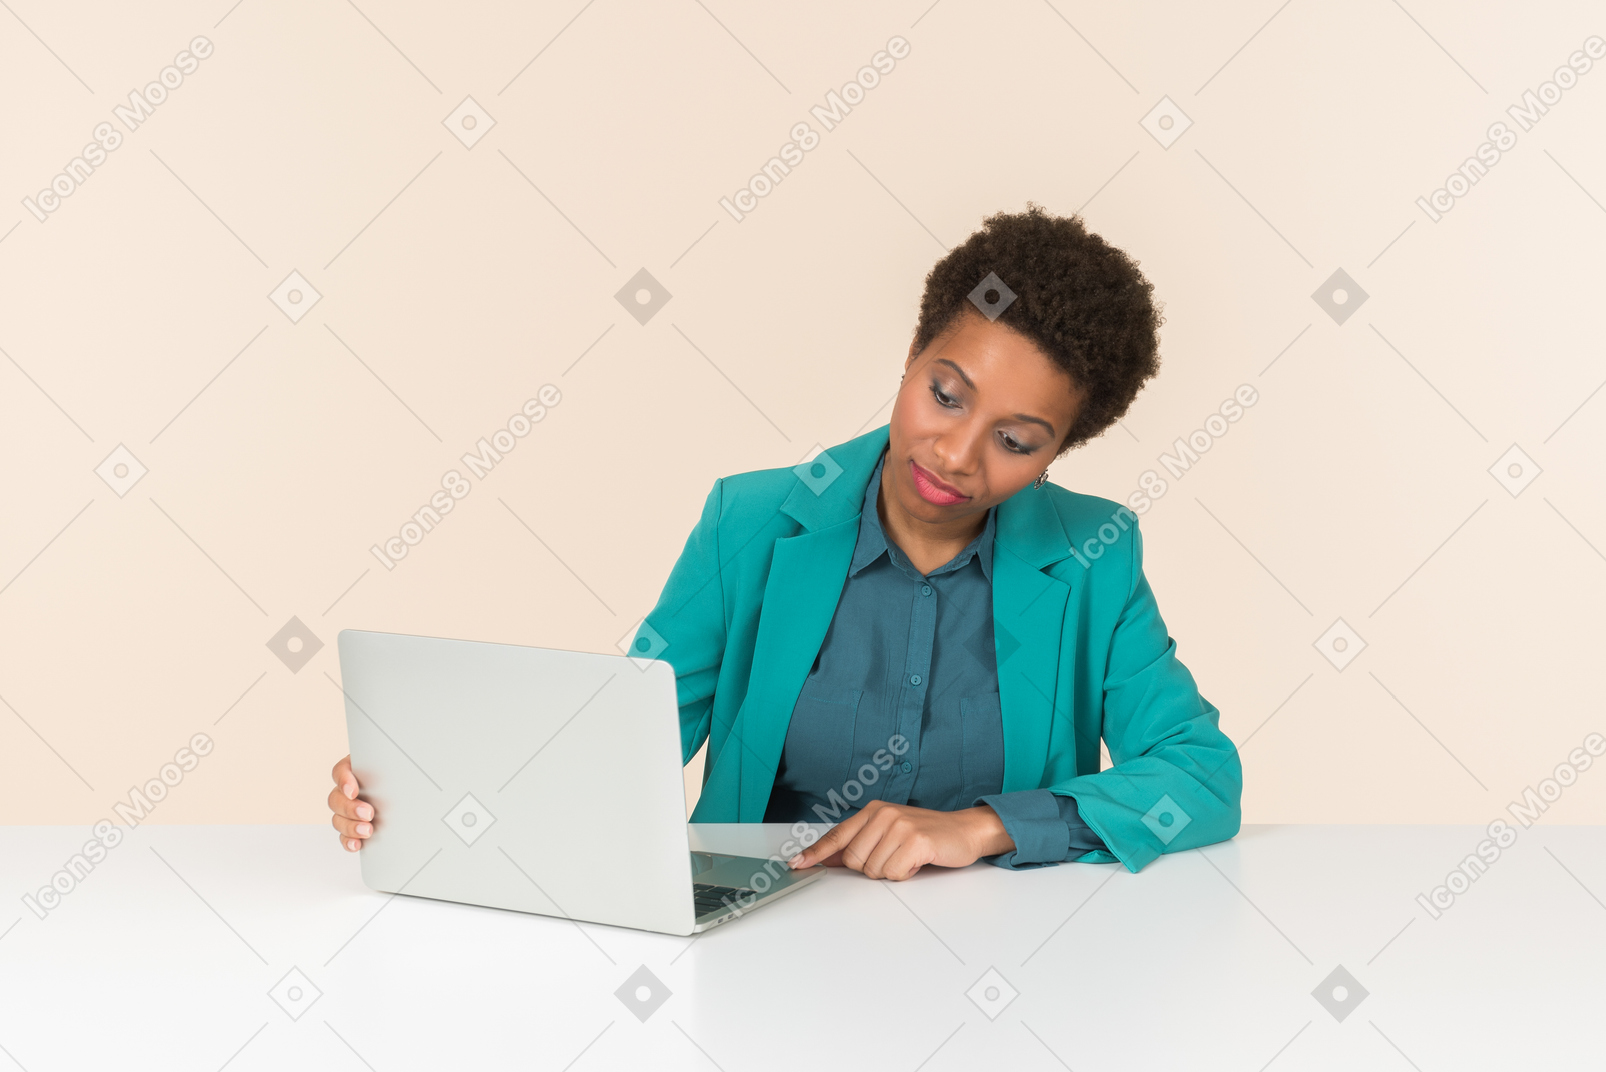 Female office worker sitting at the desk and checking laptop